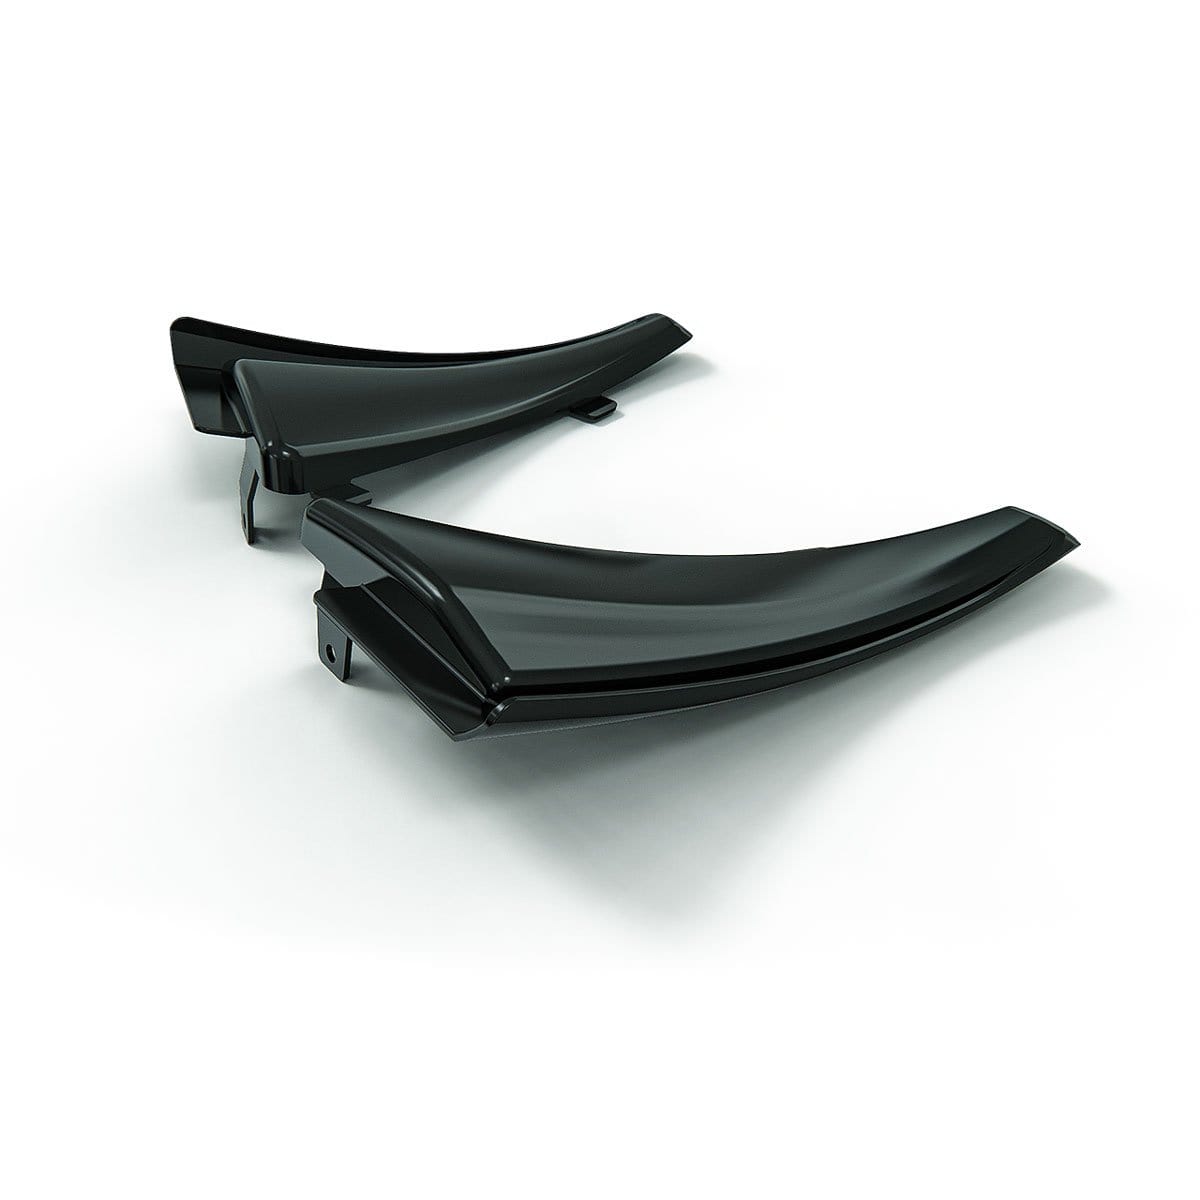 ACS C8 Rock Guards in Carbon Flash Black [50-4-041|50-4-043]CFZ protect Corvette from rock chips. Easy installation, no drilling or tape needed. Optional trim tool set available.